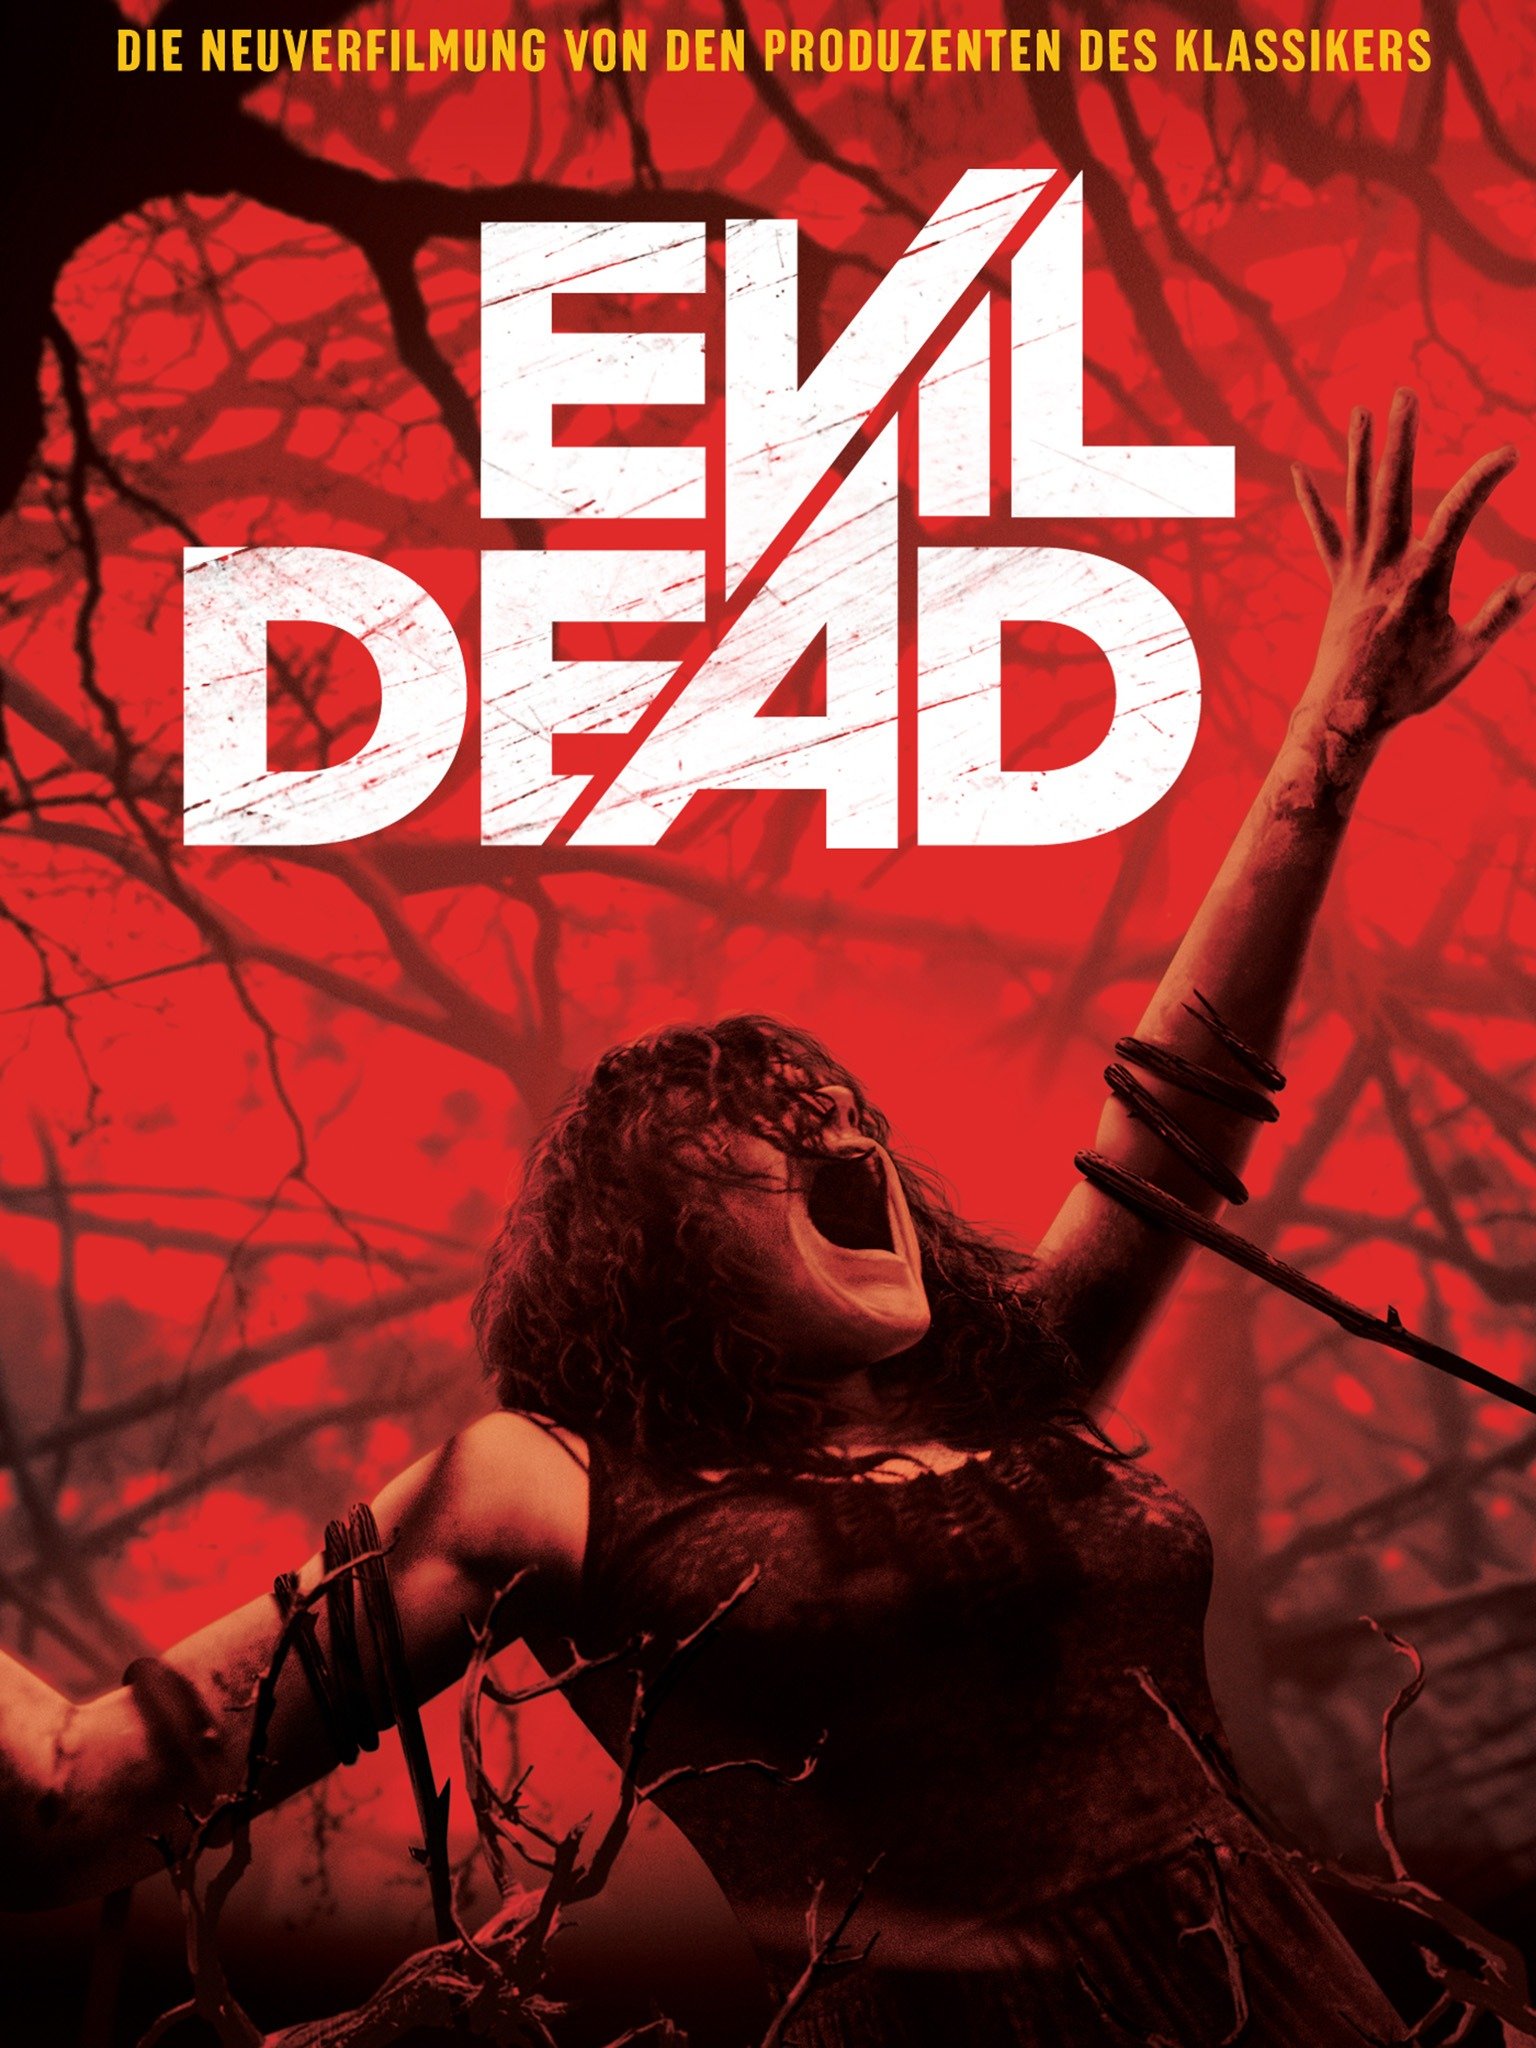 The Evil Dead and Evil Dead, the ultimate mashup of these two movies, where the two would make a return to fight off the Deadites. 